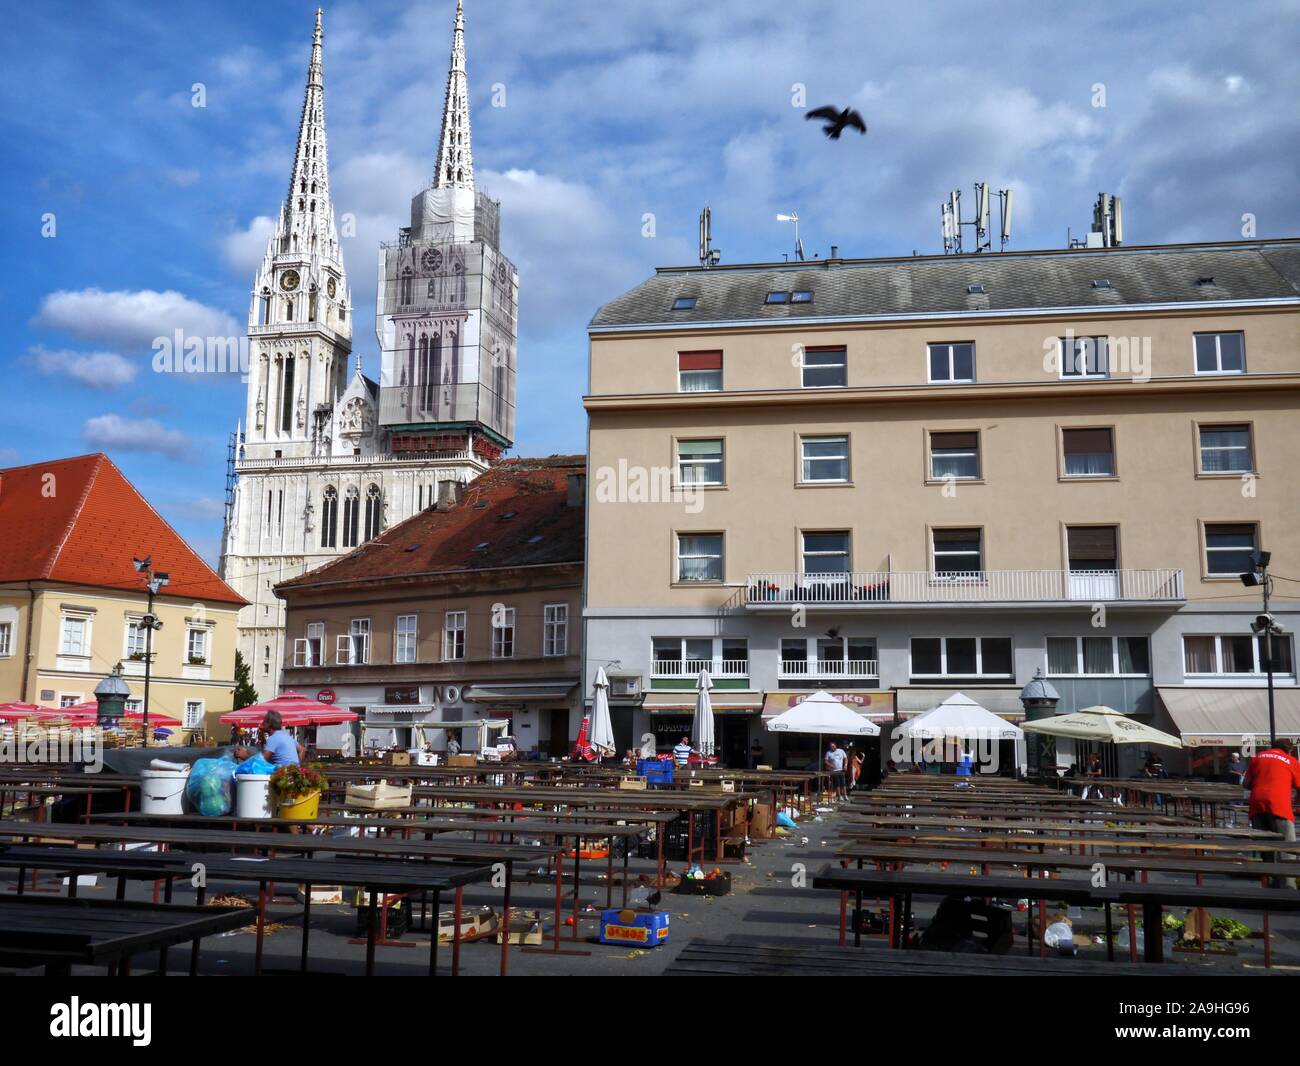 Mess and trash left after the famous Dolac Farmer's Market in Zagreb, Croatia. Stock Photo